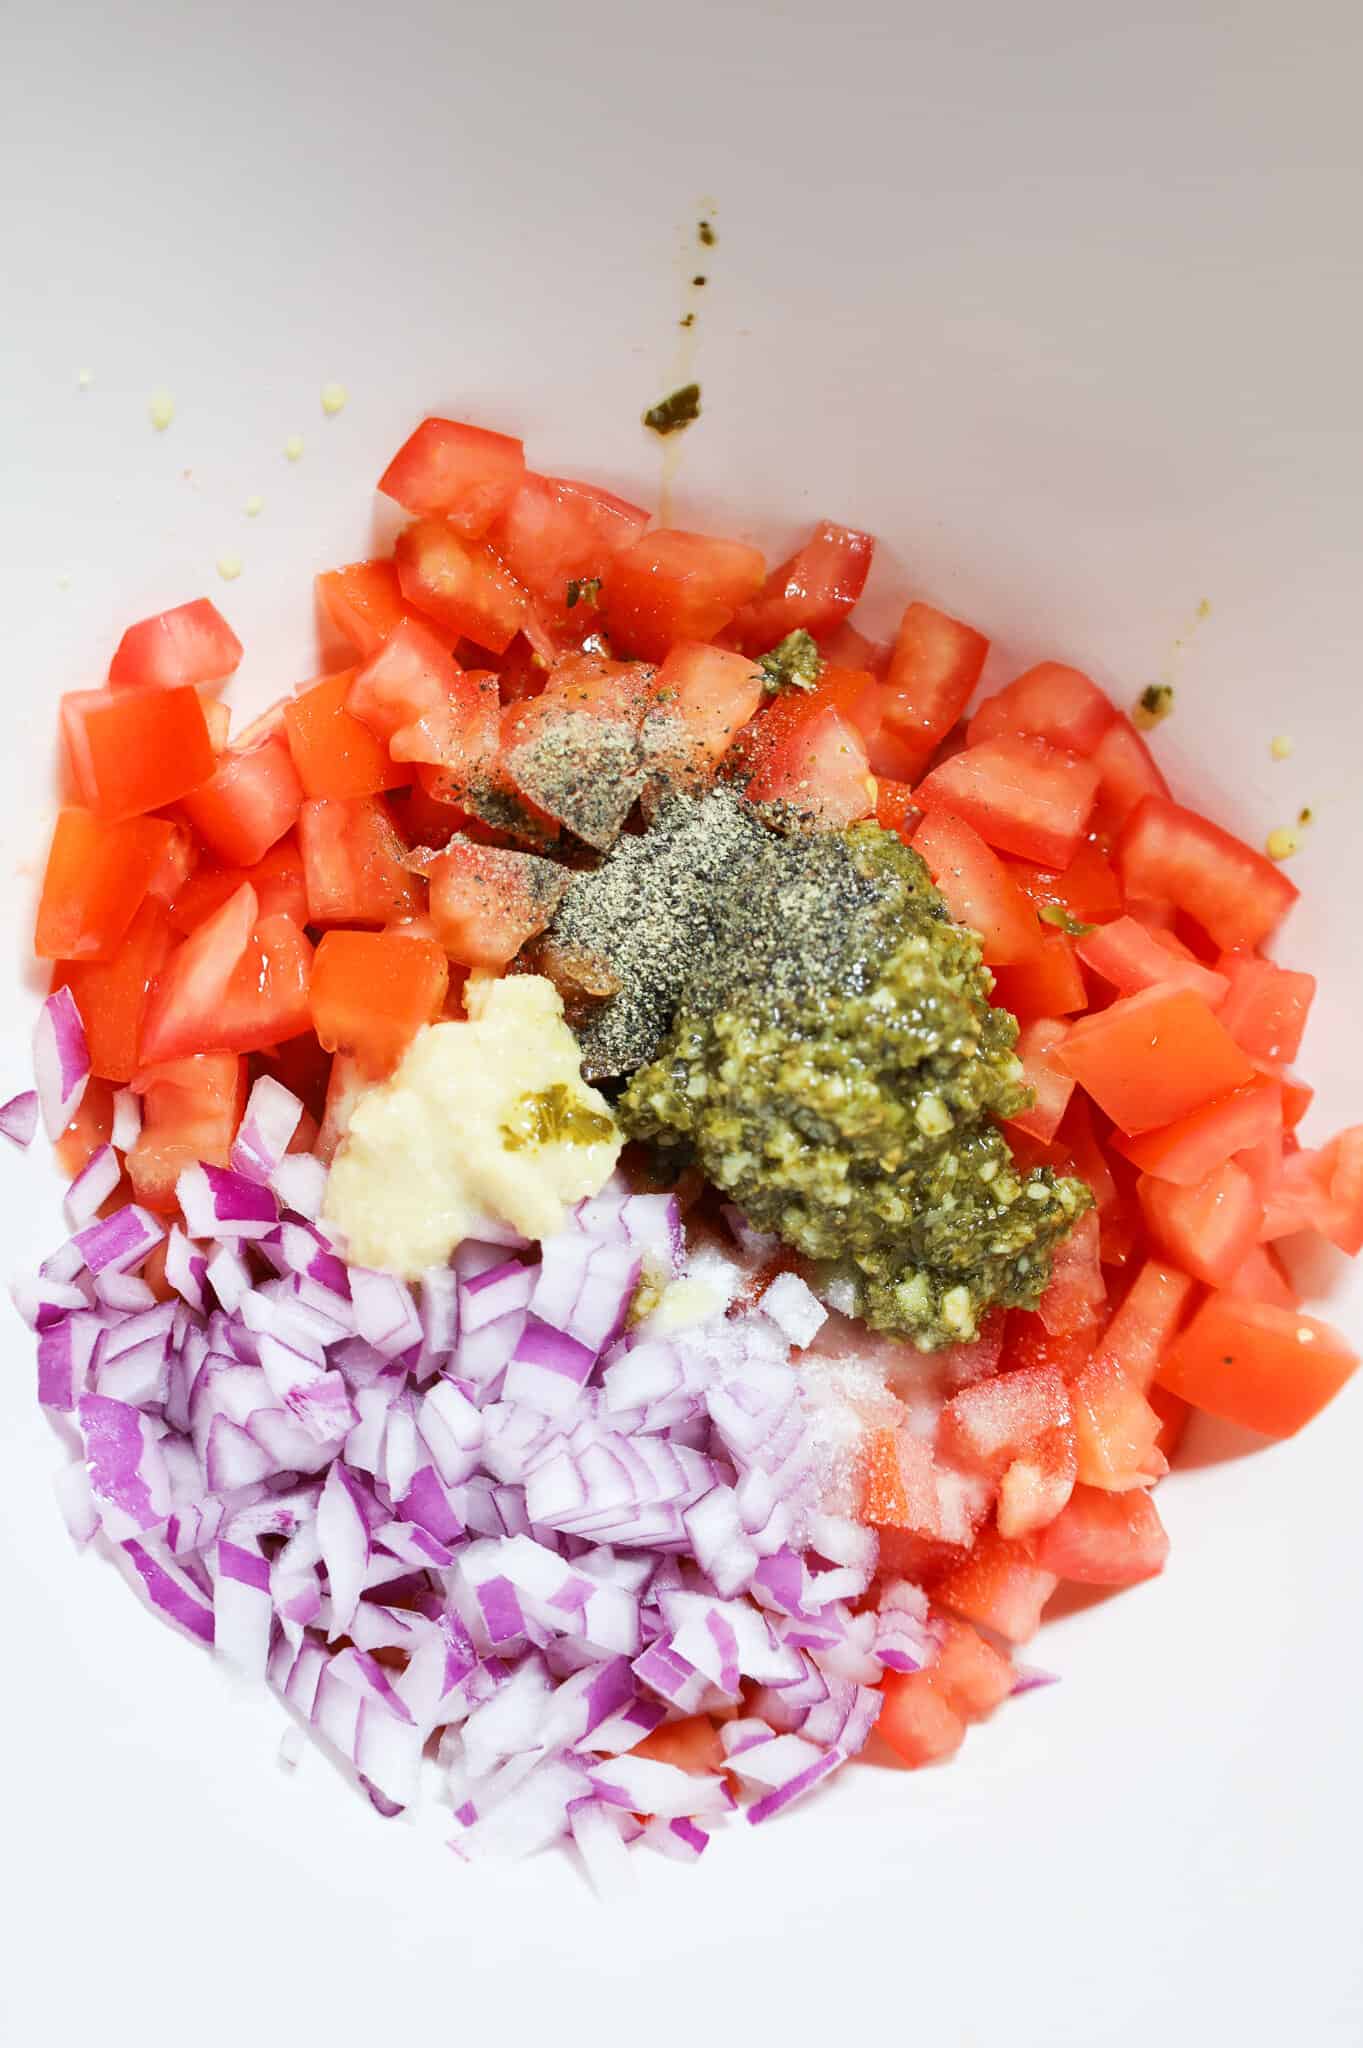 salt,, pepper, garlic puree, basil pesto, diced red onions and diced tomatoes in a mixing bowl